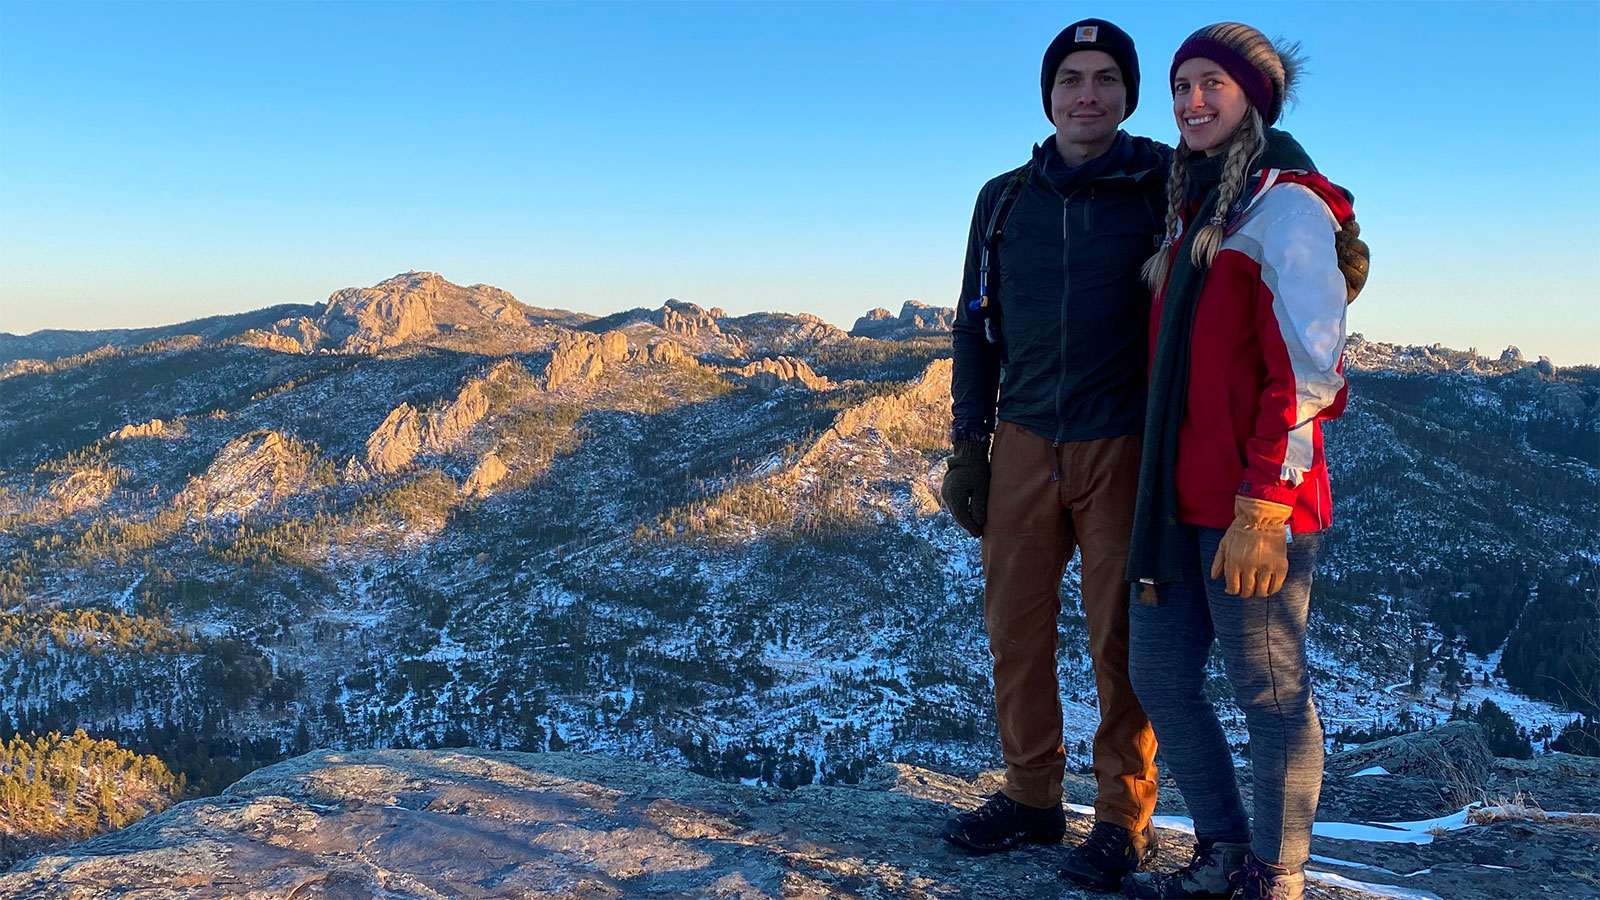 Courtney Keiser and her significant other standing at the top of Saint Elmo Peak in the Black Hills. They love camping and hiking out there.